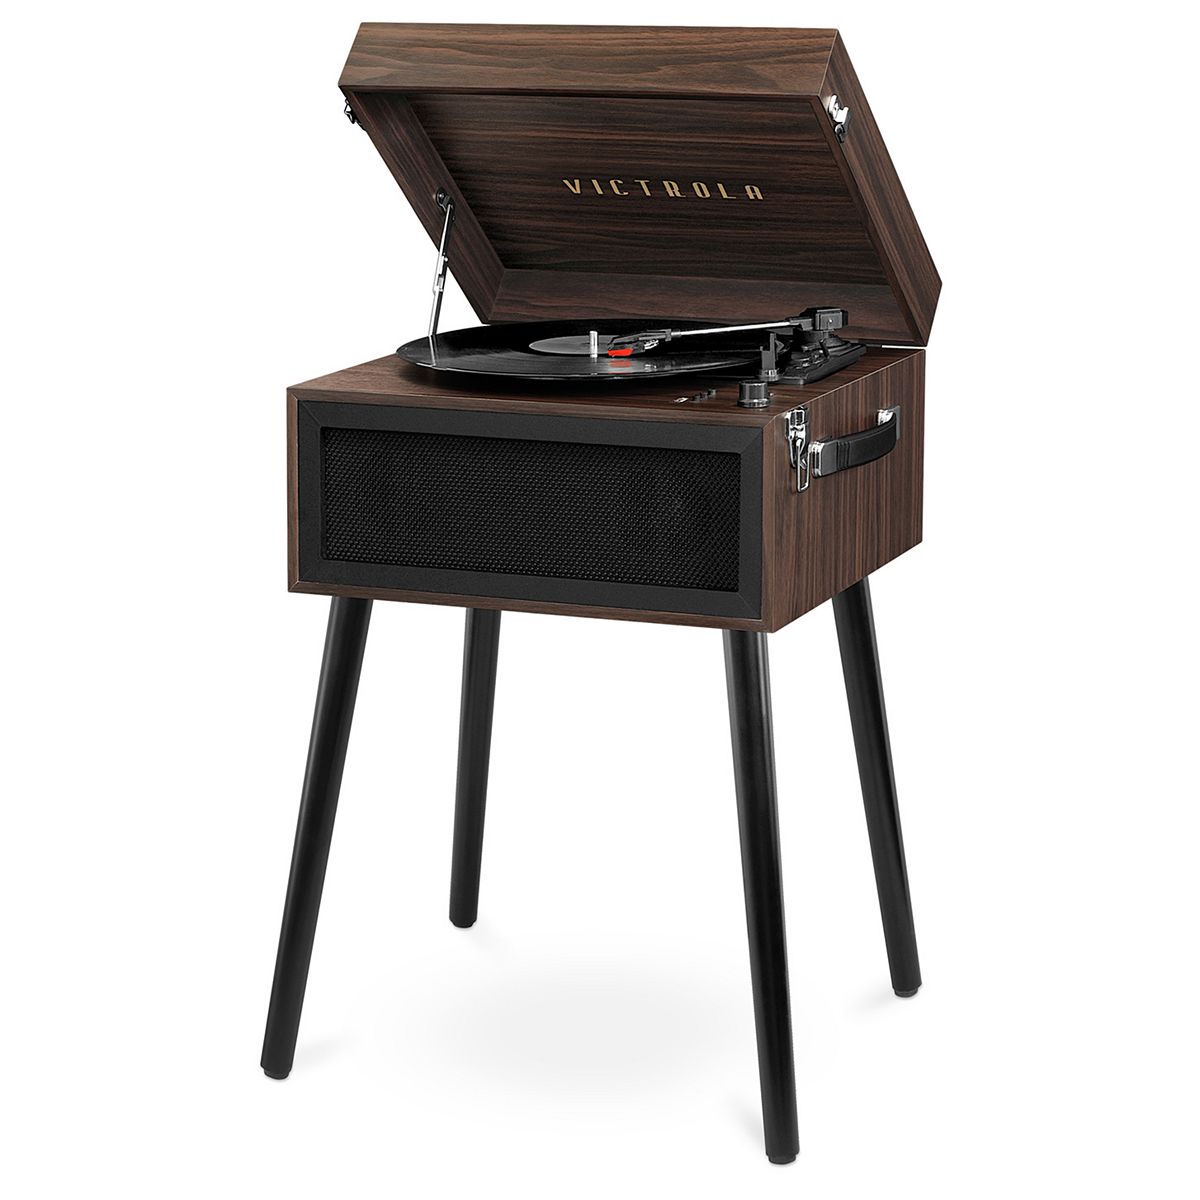 Victrola's Portable Record Player Brings the Party Anywhere